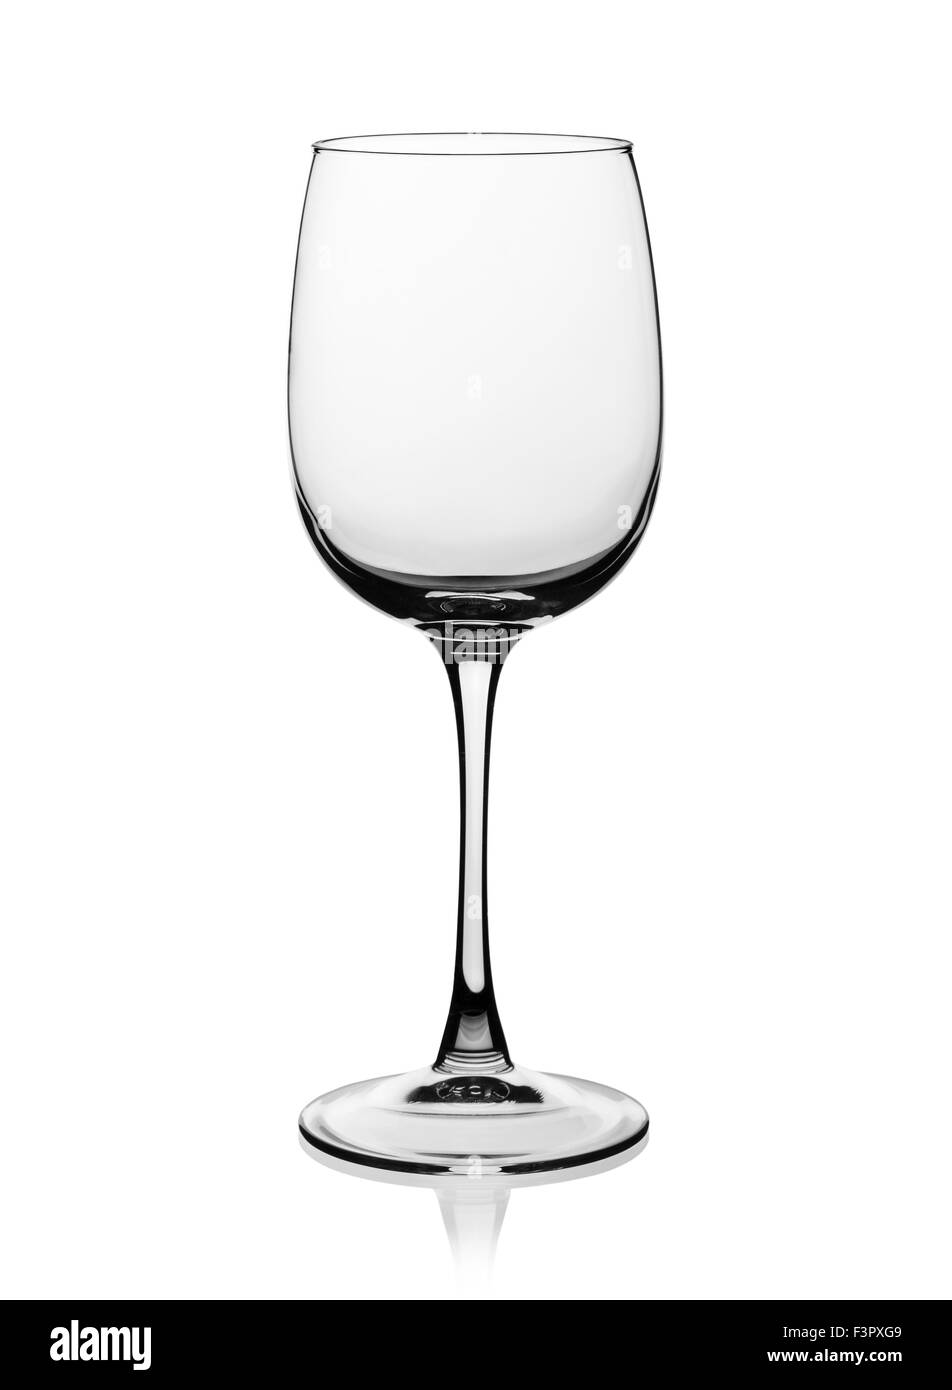 Empty wine glass isolated on the white background. Stock Photo